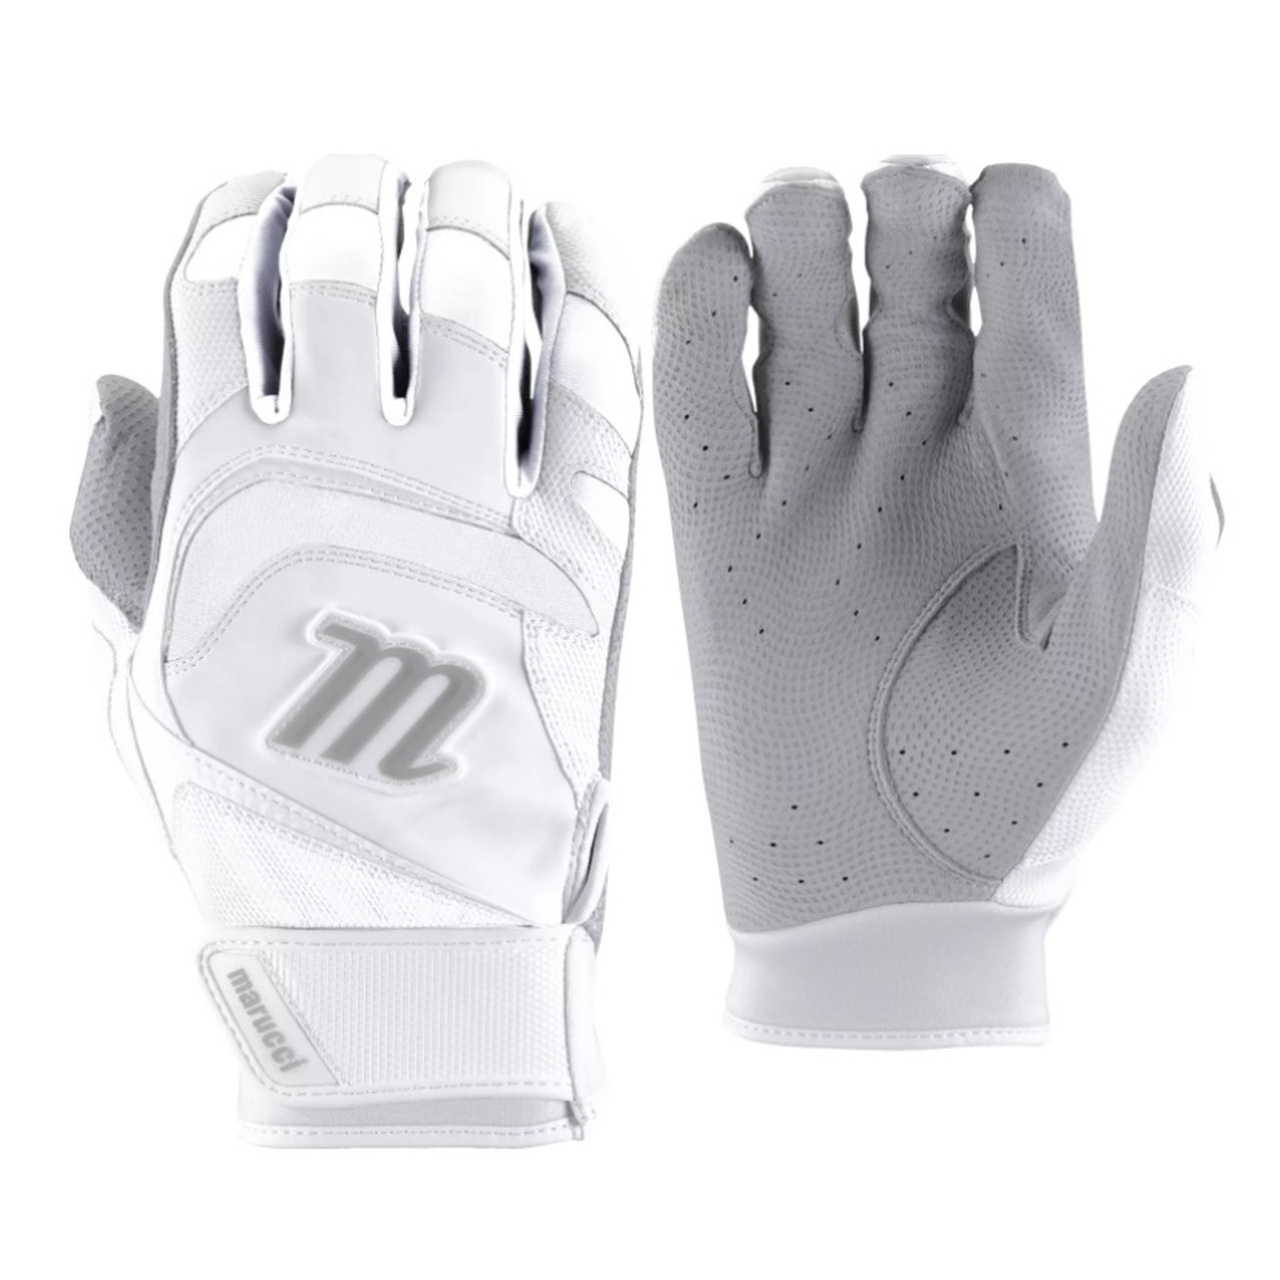 marucci-2021-signature-batting-glove-white-white-adult-small MBGSGN3-WW-AS   <ul class=a-unordered-list a-vertical a-spacing-mini> <li><span class=a-list-item>Digitally embossed perforated cabretta sheepskin palm